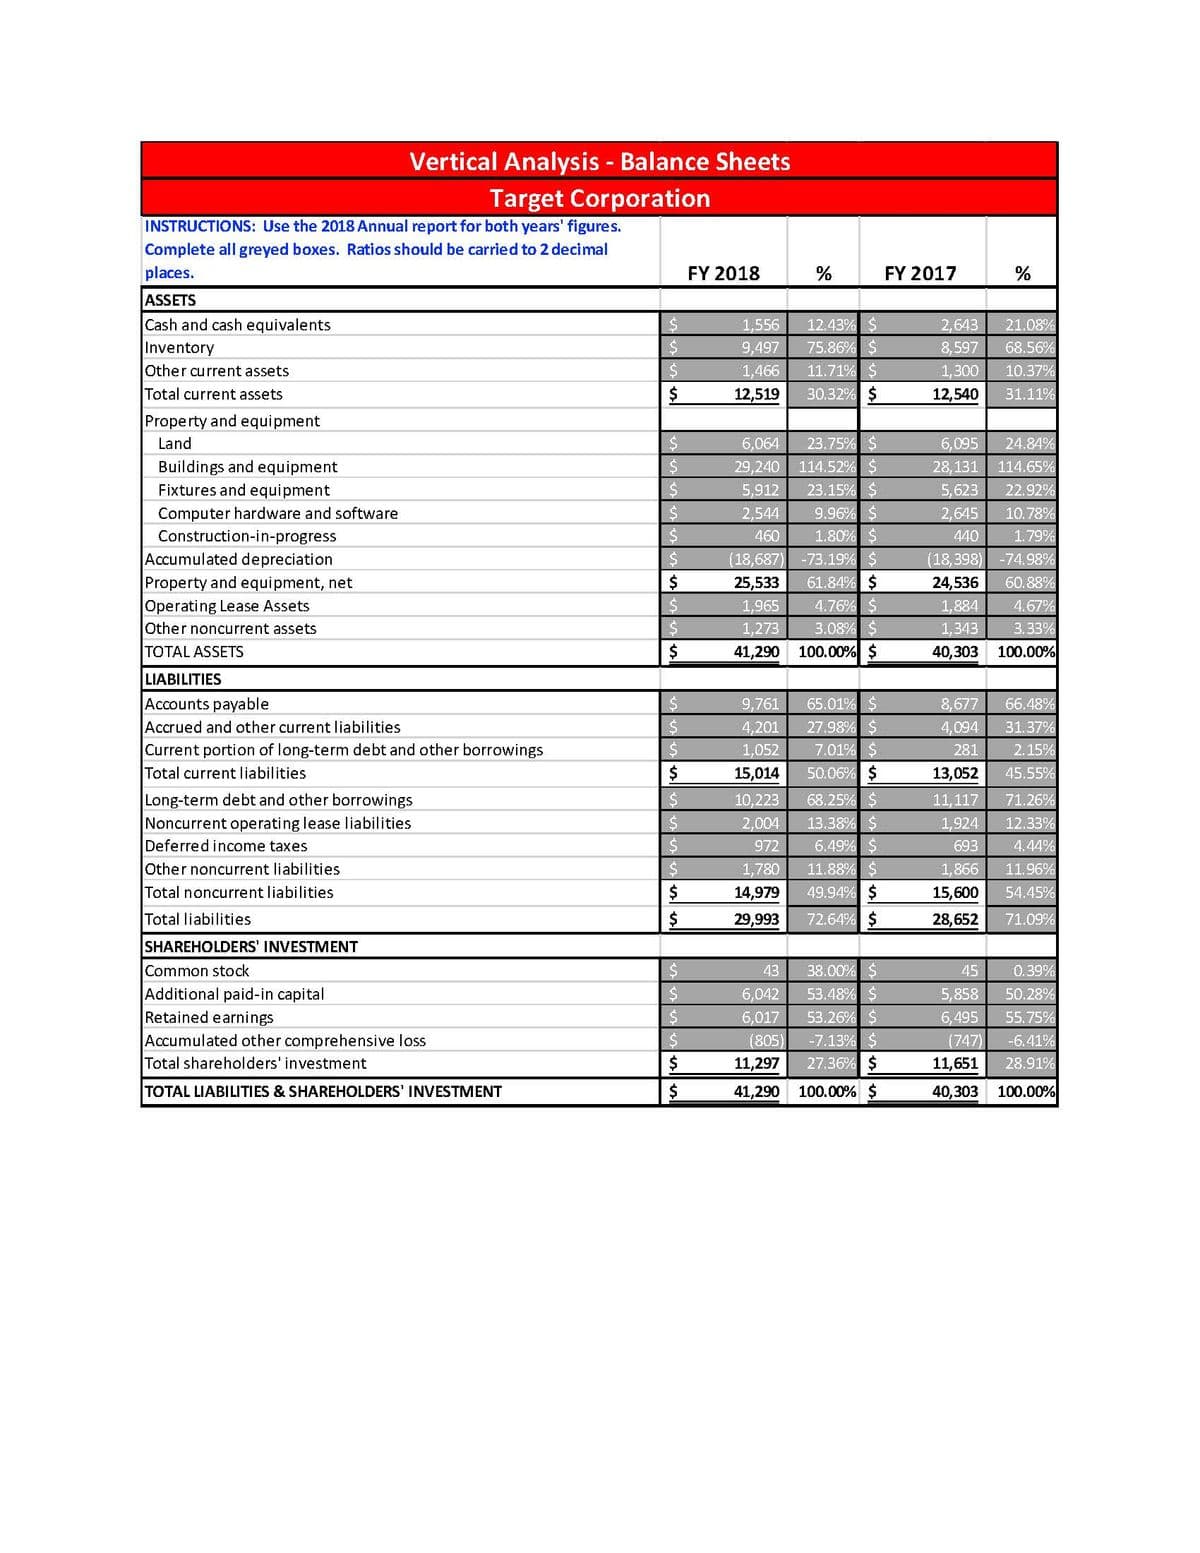 Vertical Analysis - Balance Sheets
Target Corporation
INSTRUCTIONS: Use the 2018 Annual report for both years' figures.
Complete all greyed boxes. Ratios should be carried to 2 decimal
places.
FY 2018
FY 2017
ASSETS
Cash and cash equivalents
12.43% $
75.86% $
1,556
2,643
21.08%
8,597
68.56%
Inventory
Other current assets
9,497
11.71% $
30.32% $
1,466
1,300
10.37%
Total current assets
12,519
12,540
31.11%
Property and equipment
Land
6,064
23.75% $
6,095
24.84%
29,240 114.52% $
23.15% $
9.96% $
1.80% $
-73.19% $
61.84% $
4.76% $
3.08% $
Buildings and equipment
28,131
114.65%
Fixtures and equipment
5,912
5,623
22.92%
Computer hardware and software
2,544
2,645
10.78%
Construction-in-progress
460
440
1.79%
Accumulated depreciation
Property and equipment, net
Operating Lease Assets
Other noncurrent assets
(18,687)
(18,398)
-74.98%
25,533
60.88%
24,536
1,884
1,965
4.67%
1,273
1,343
3.33%
TOTAL ASSETS
41,290
100.00% $
40,303 100.00%
LIABILITIES
Accounts payable
Accrued and other current liabilities
Current portion of long-term debt and other borrowings
Total current liabilities
65.01% $
27.98% $
7.01% $
50.06% $
8,677
66.48%
9,761
4,201
4,094
31.37%
1,052
281
2.15%
15,014
13,052
45.55%
Long-term debt and other borrowings
Noncurrent operating lease liabilities
Deferred income taxes
68.25% $
13.38% $
6.49% $
11.88% $
10,223
11,117
71.26%
2,004
1,924
12.33%
972
693
4.44%
Other noncurrent liabilities
1,780
1,866
11.96%
Total noncurrent liabilities
$4
14,979
49.94% $
15,600
54.45%
Total liabilities
29,993
72.64% $
28,652
71.09%
SHAREHOLDERS' INVESTMENT
38.00% $
53.48% $
53.26% $
Common stock
43
45
0.39%
Additional paid-in capital
Retained earnings
Accumulated other comprehensive loss
Total shareholders' investment
6,042
5,858
50.28%
6,017
6,495
55.75%
-7.13% $
27.36% $
(805)
(747)
-6.41%
11,297
11,651
28.91%
TOTAL LIABILITIES & SHAREHOLDERS' INVESTMENT
$
41,290
100.00% $
40,303
100.00%
%24
